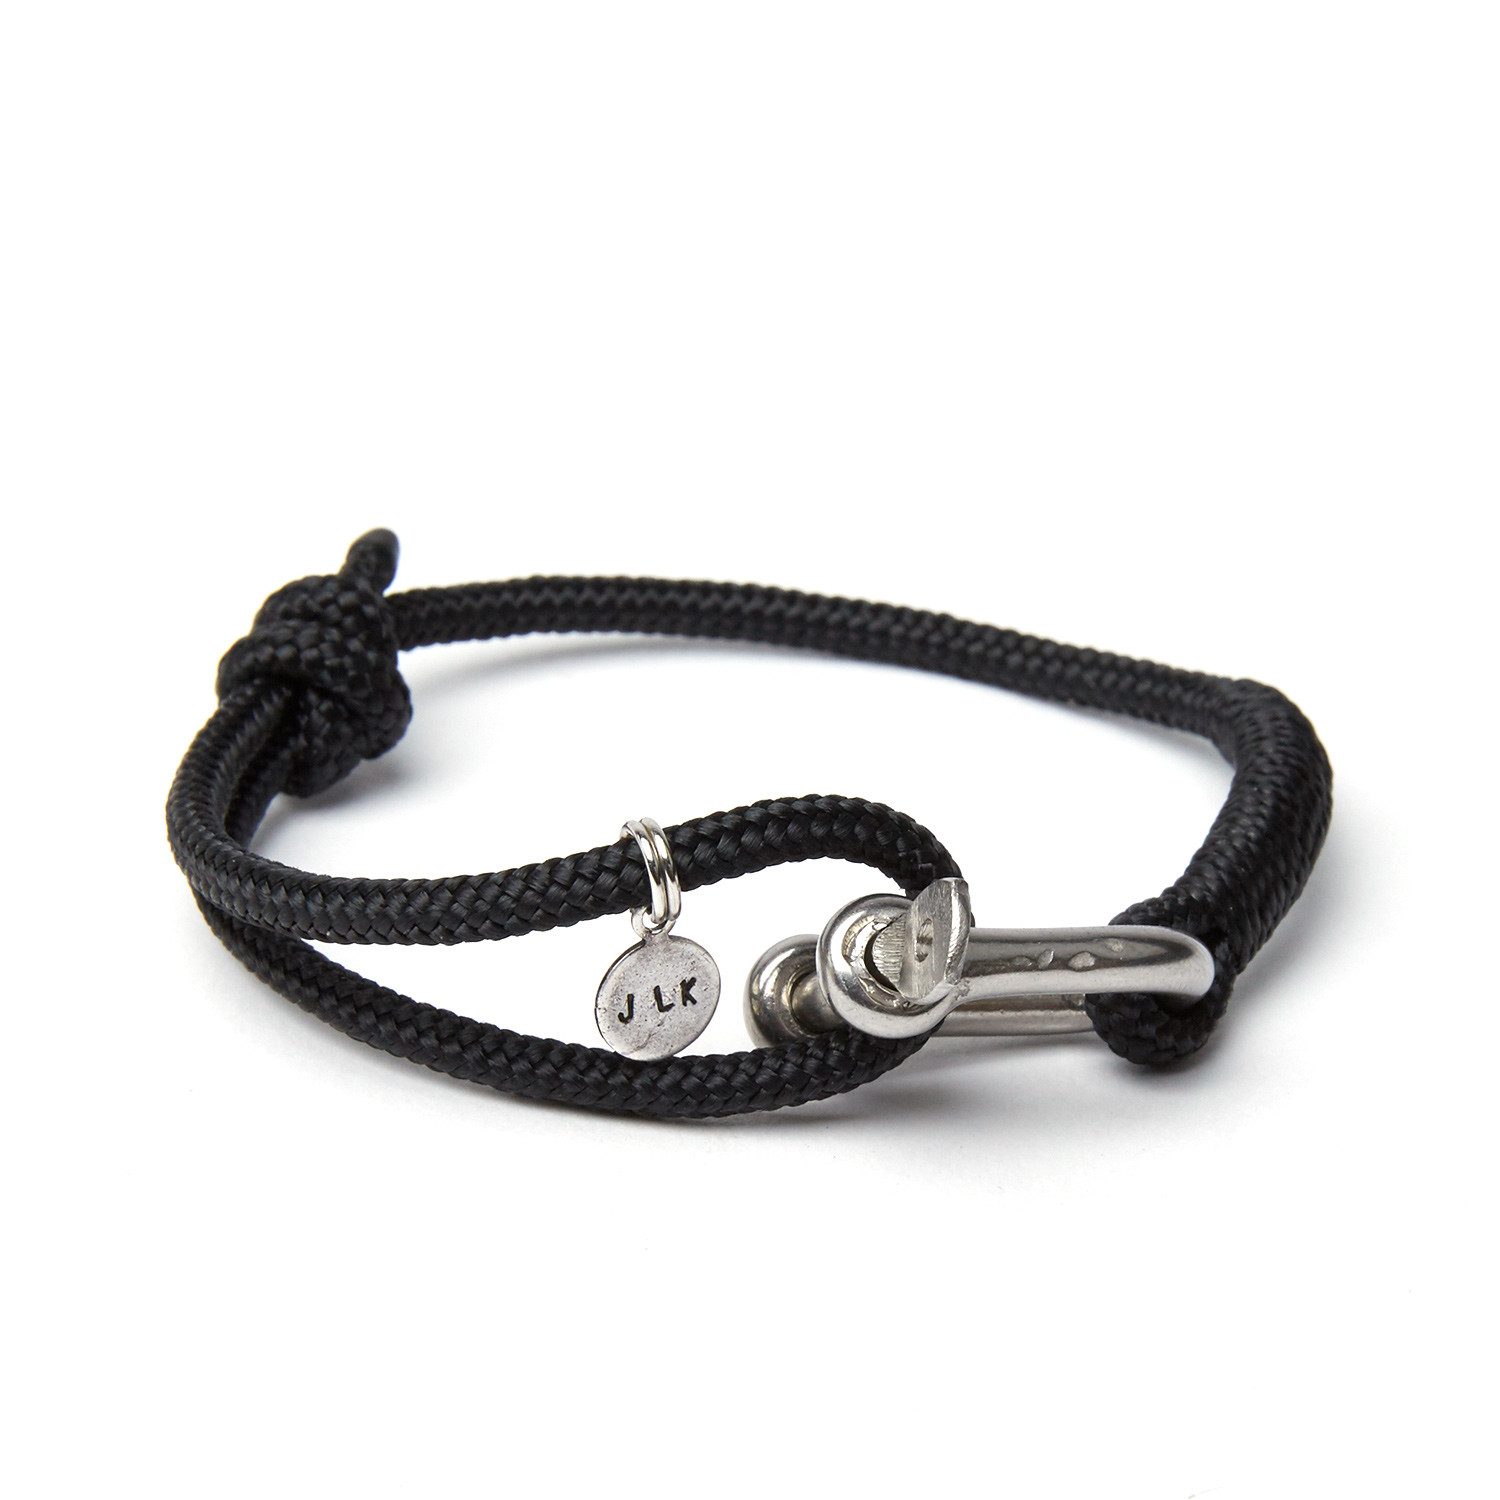 Stainless Steel D-Shackle Adjustable Cuff // Black - JLK - Touch of Modern